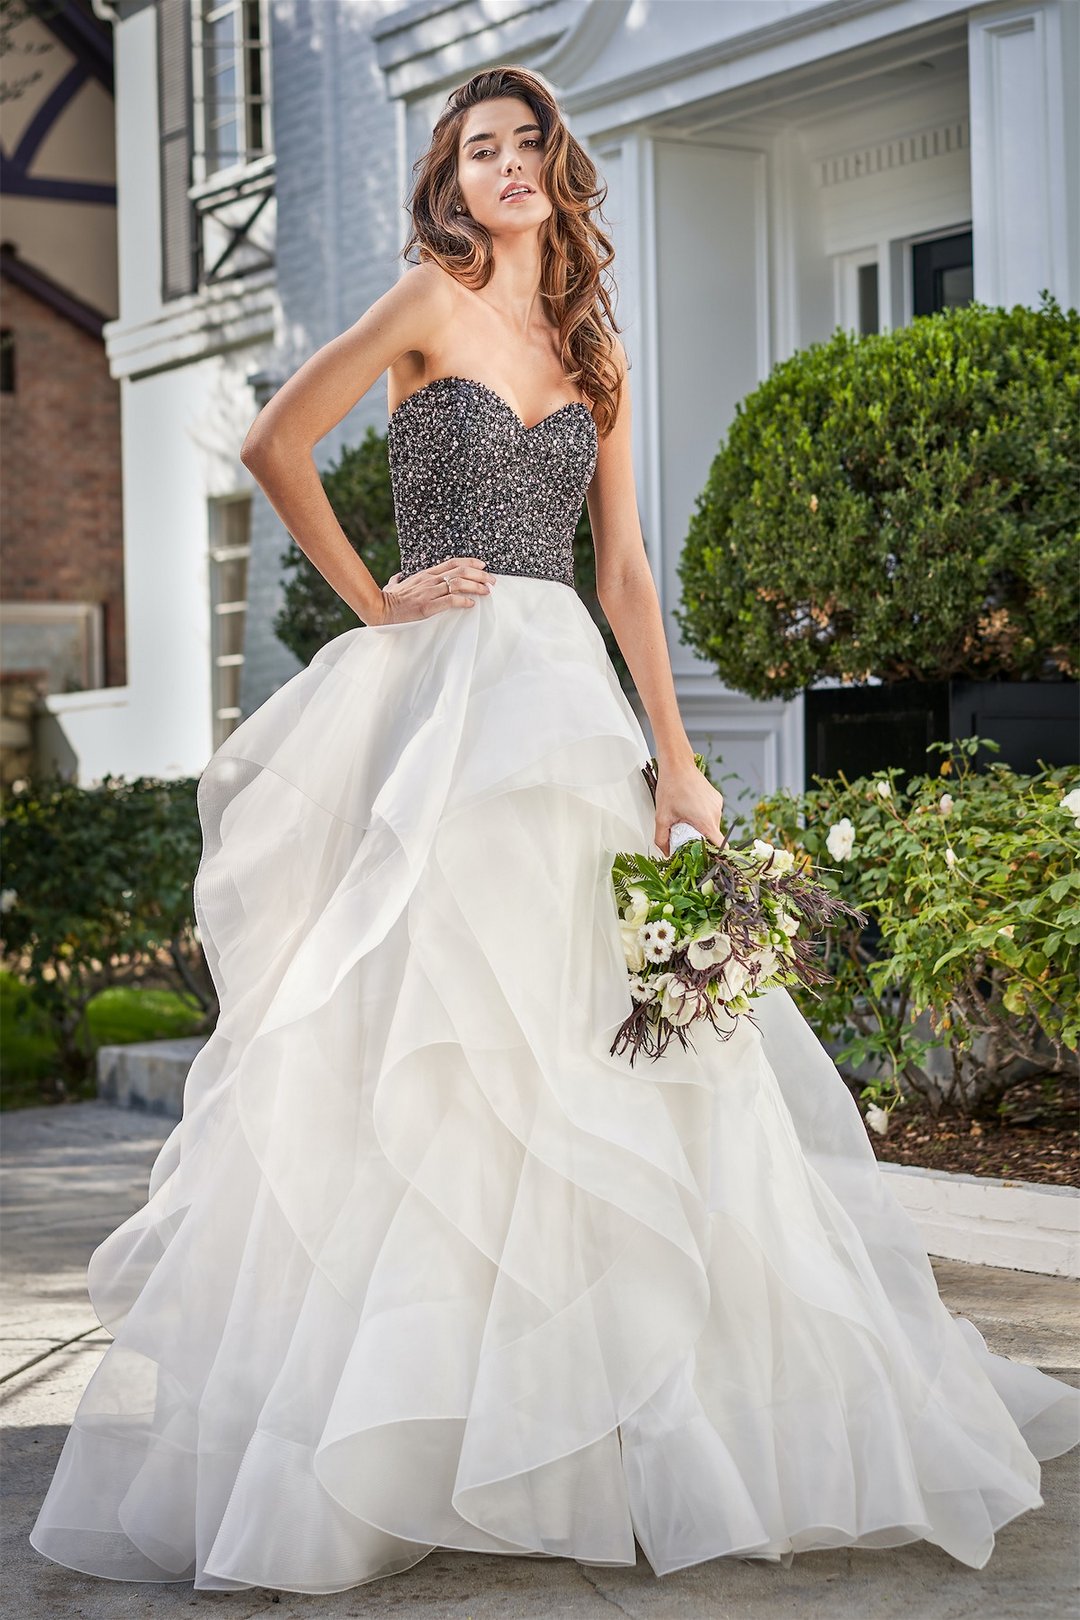 sweetheart black and white ball gown wedding dress